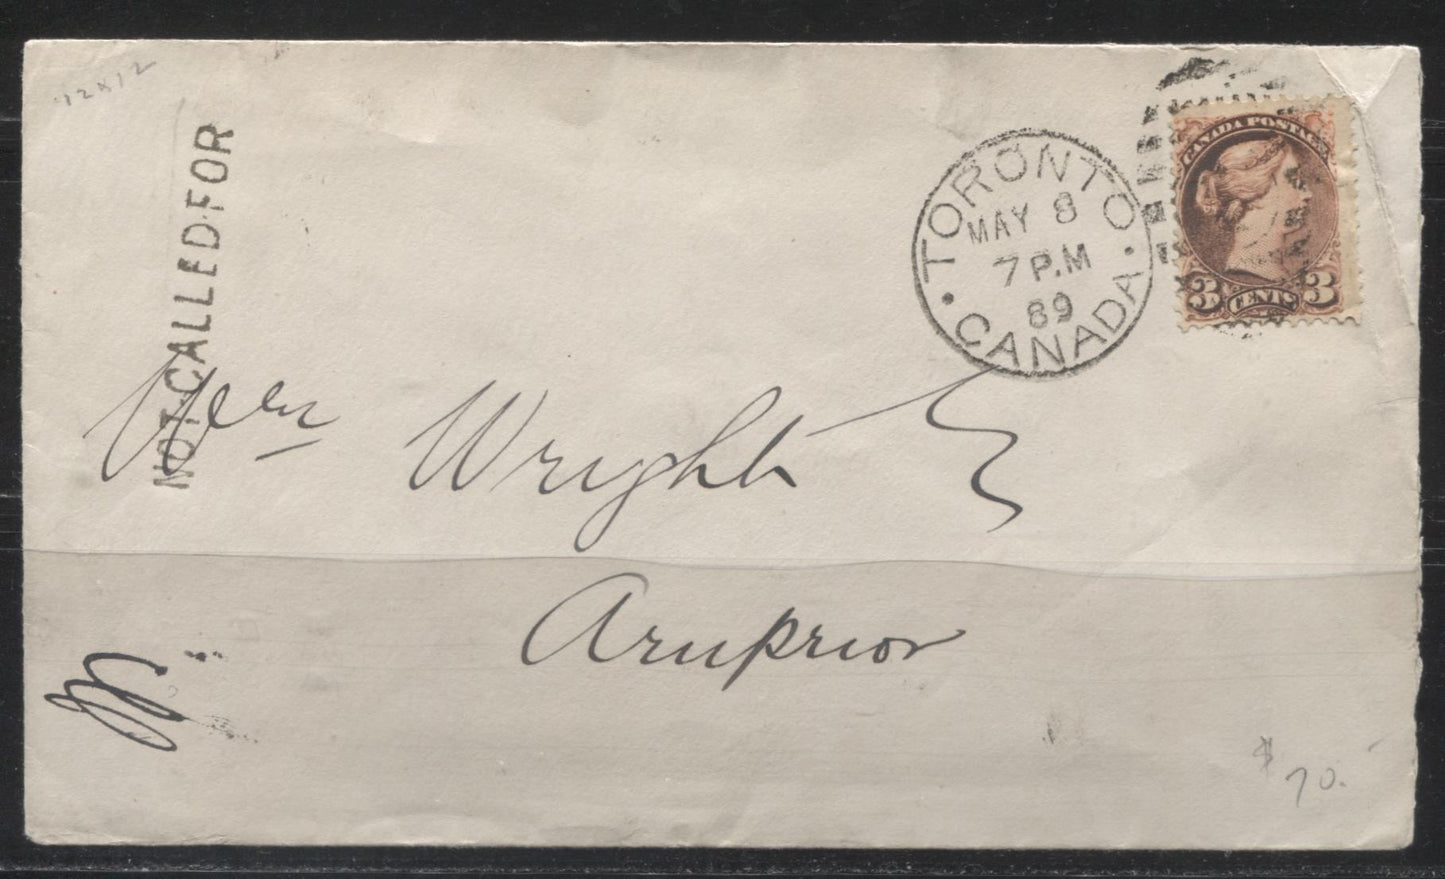 Lot 222 Canada #37 3c  Queen Victoria, 1870-1897 Small Queen Issue, A Fine Single Franking Dead Letter Office "Not Called For" Cover From 1889